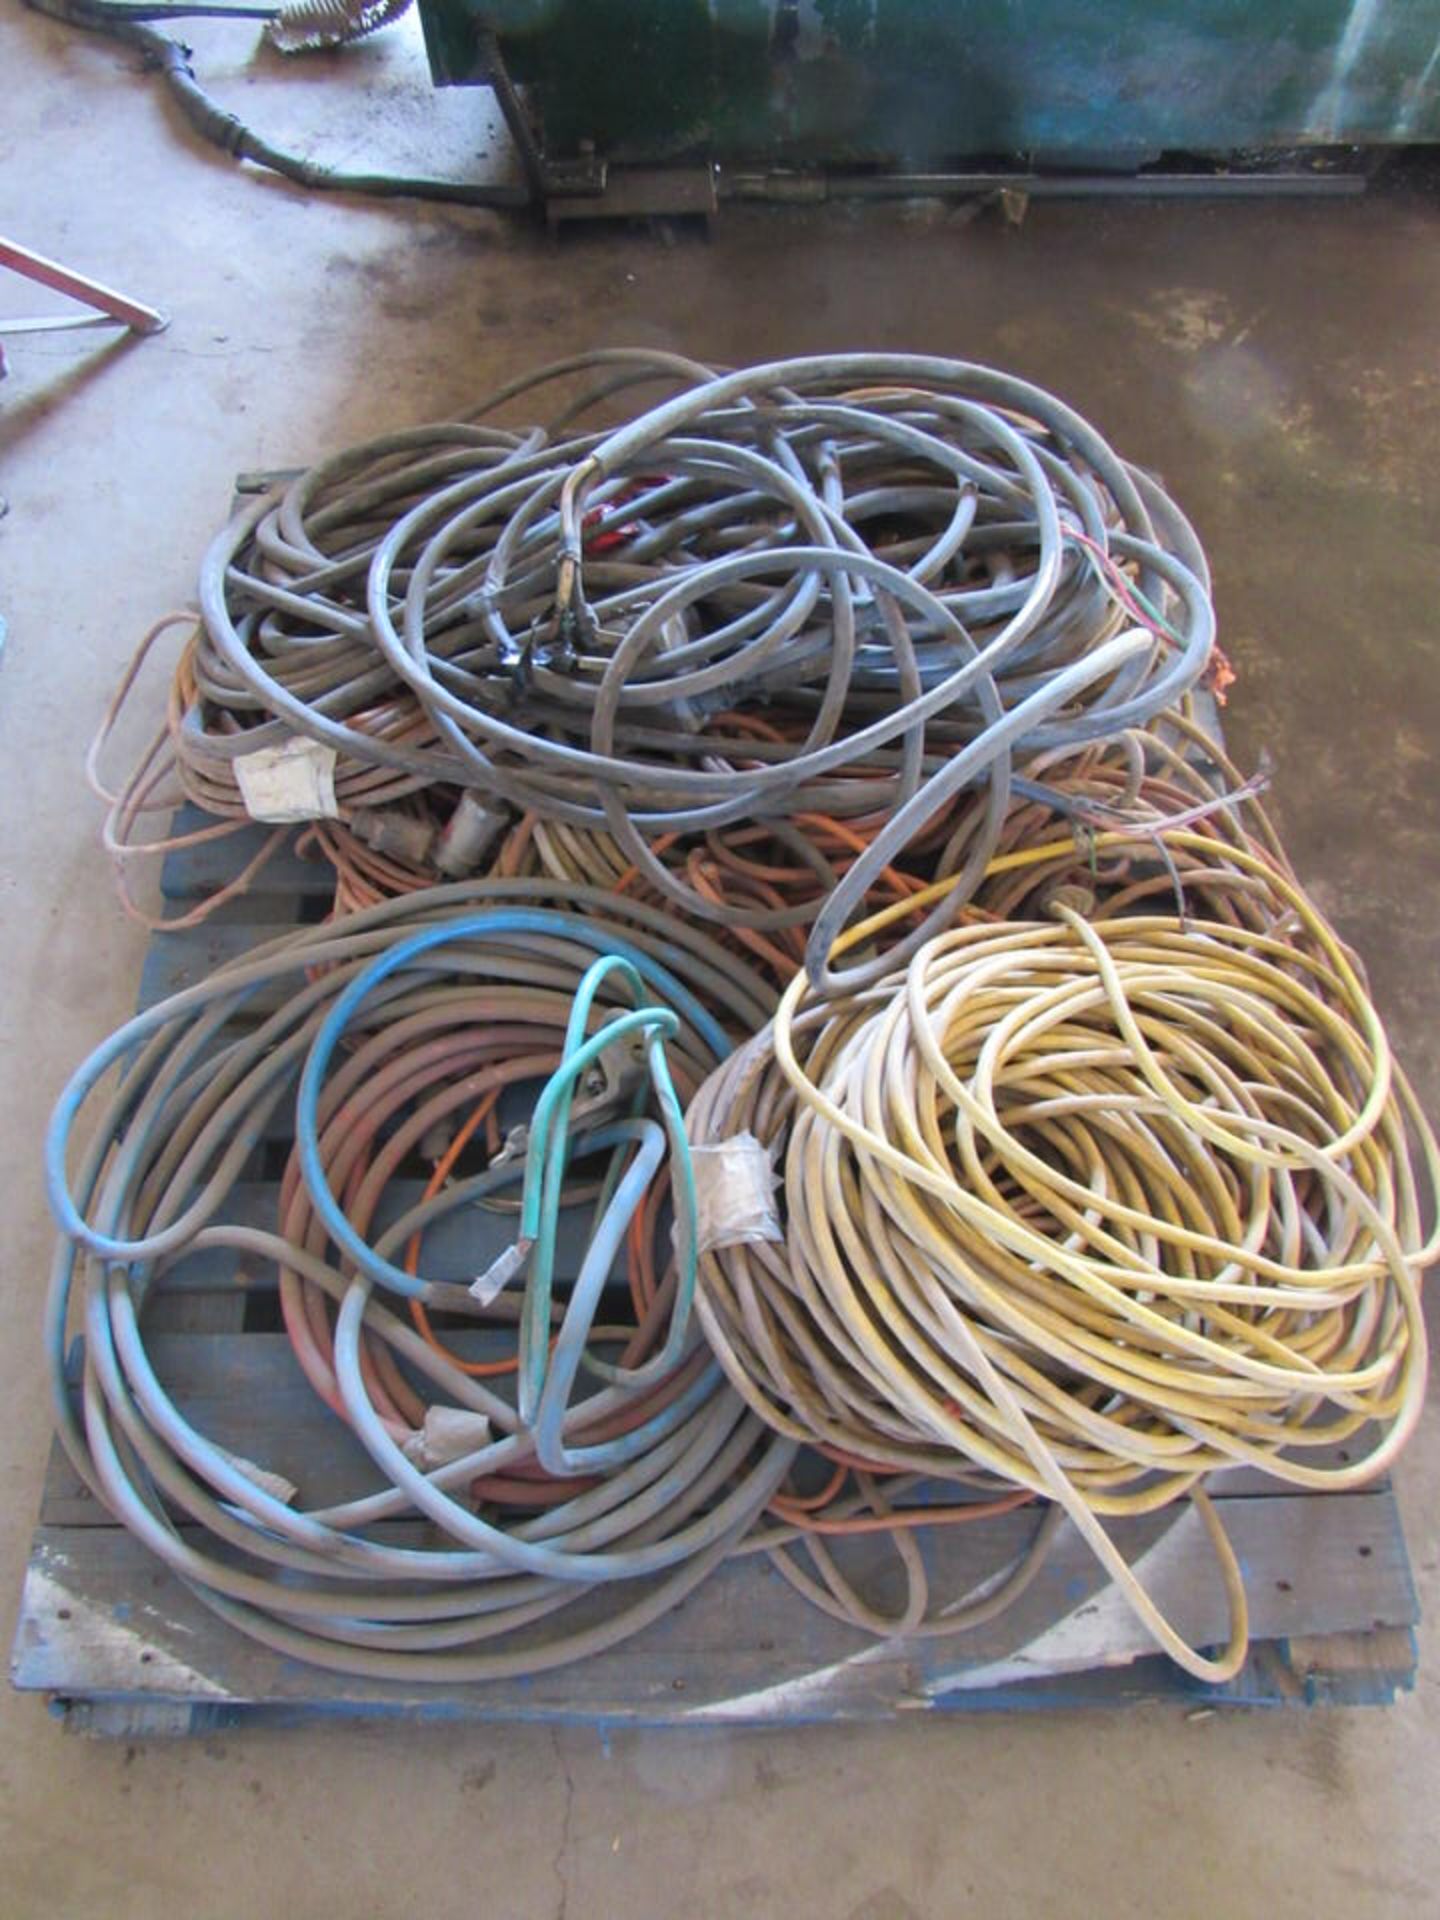 Pallet #6: Lot of Miscellaneous Electrical Cords